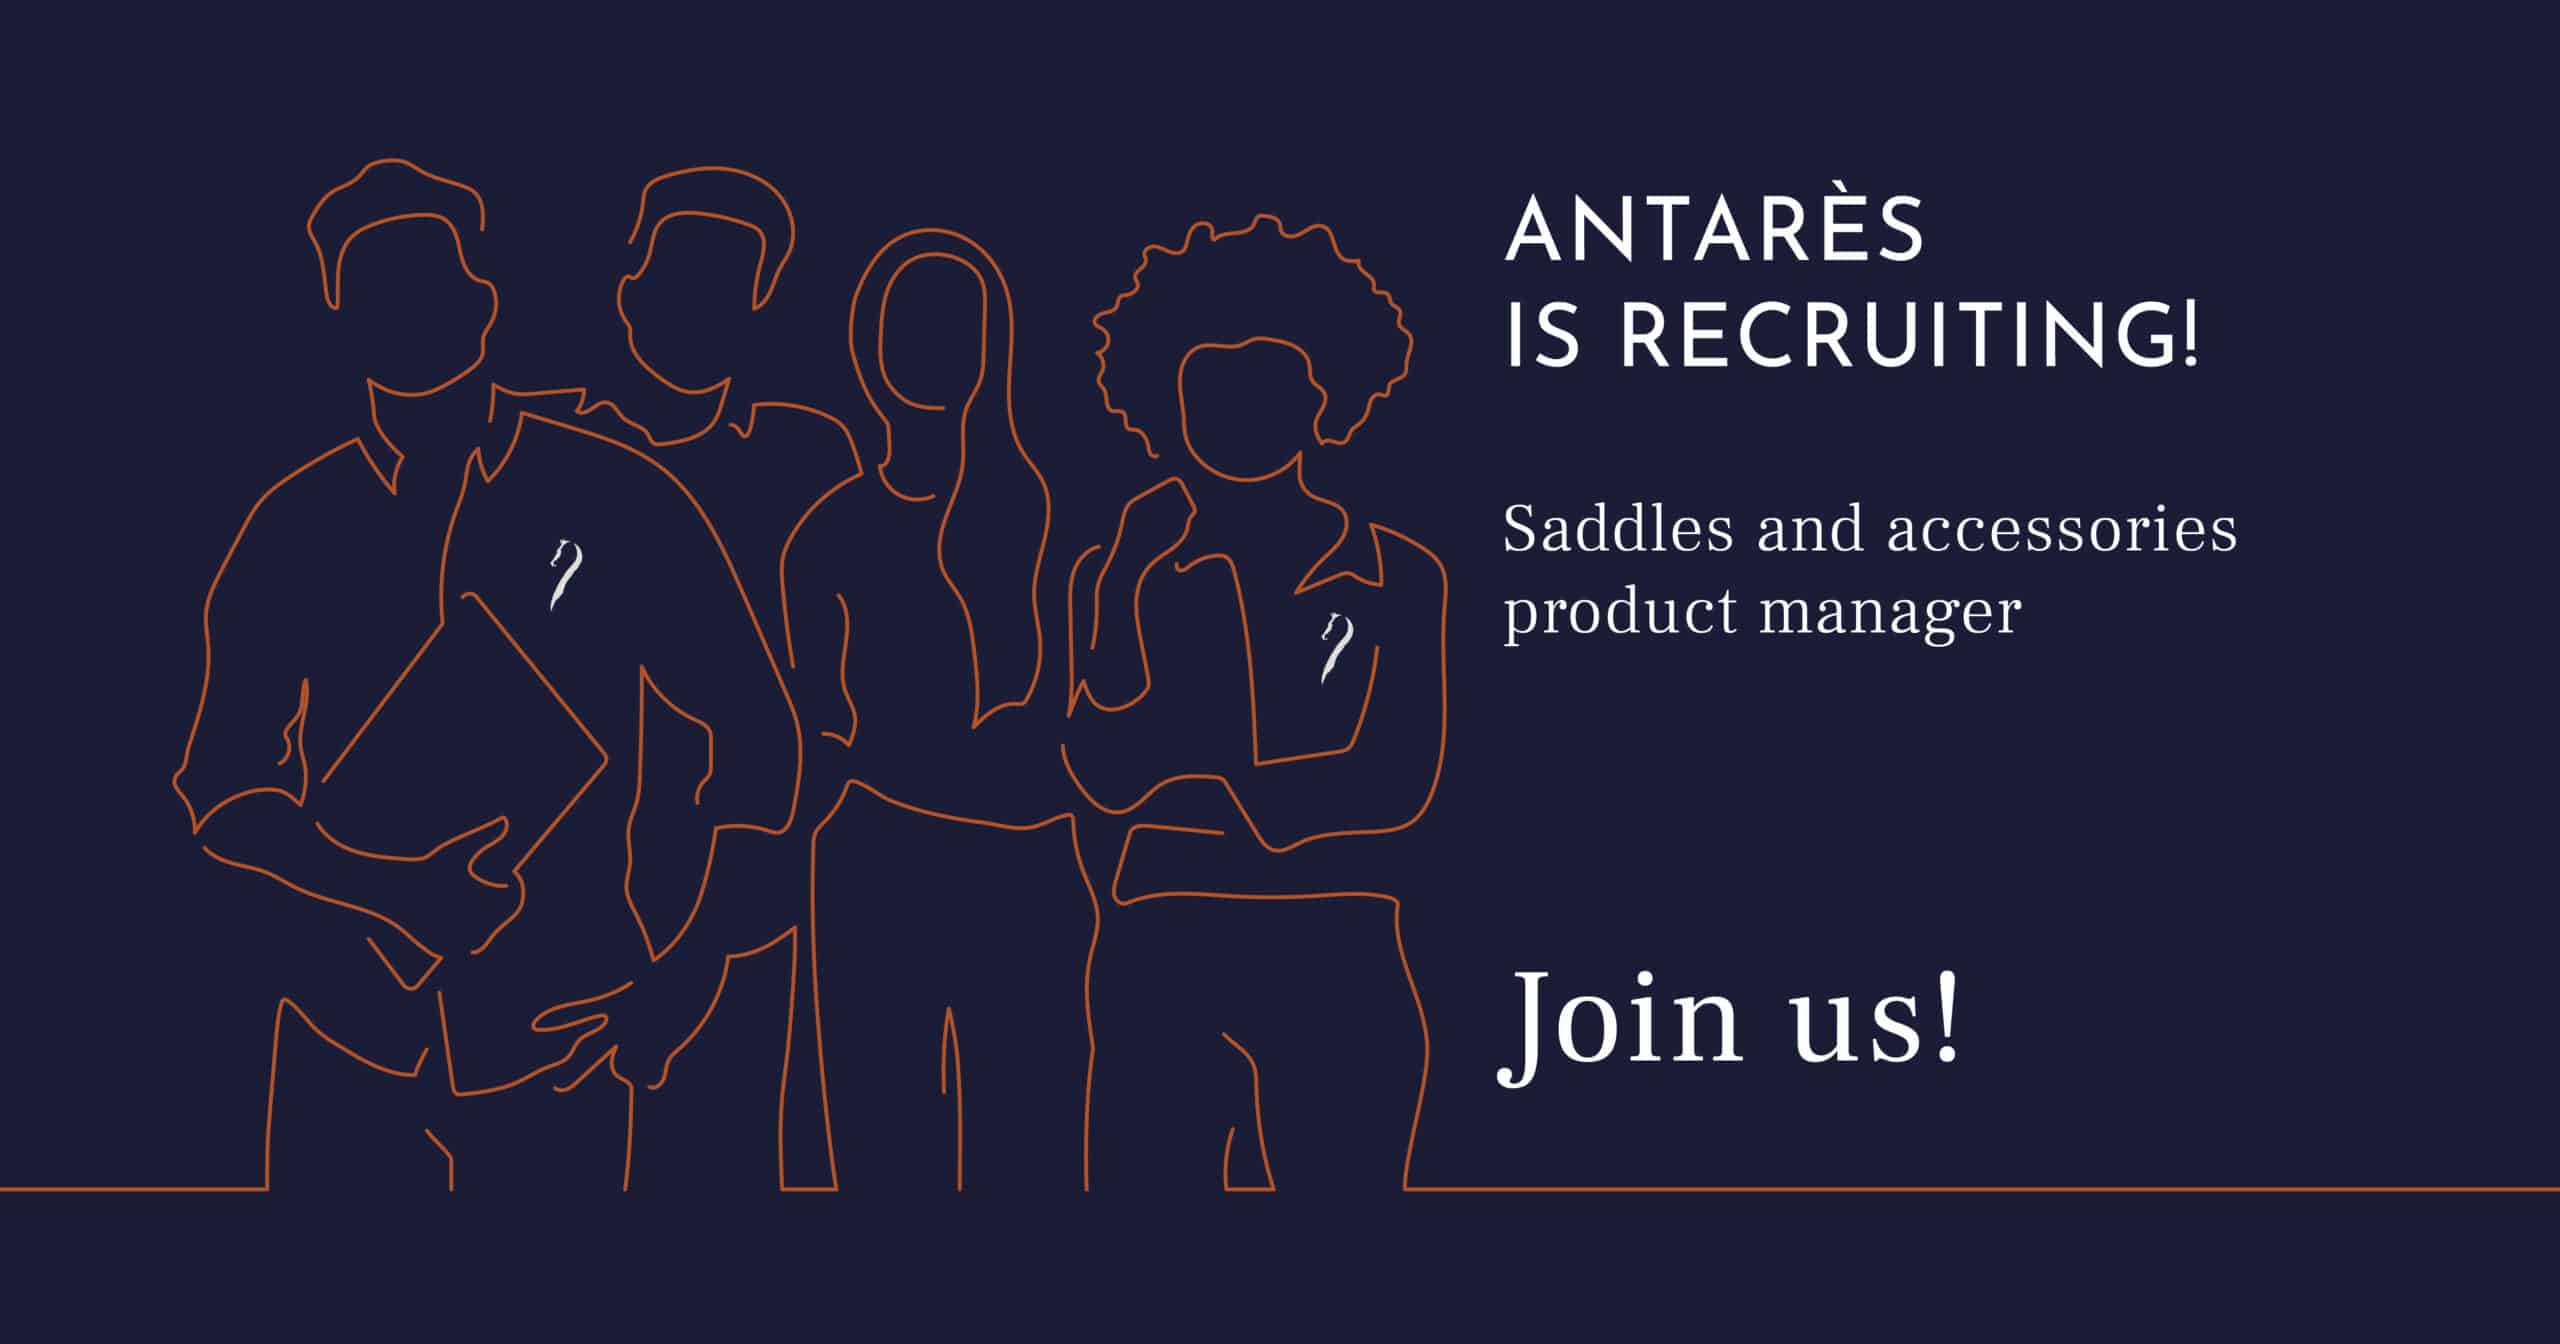 Recruitment of a saddles and accessories product manager